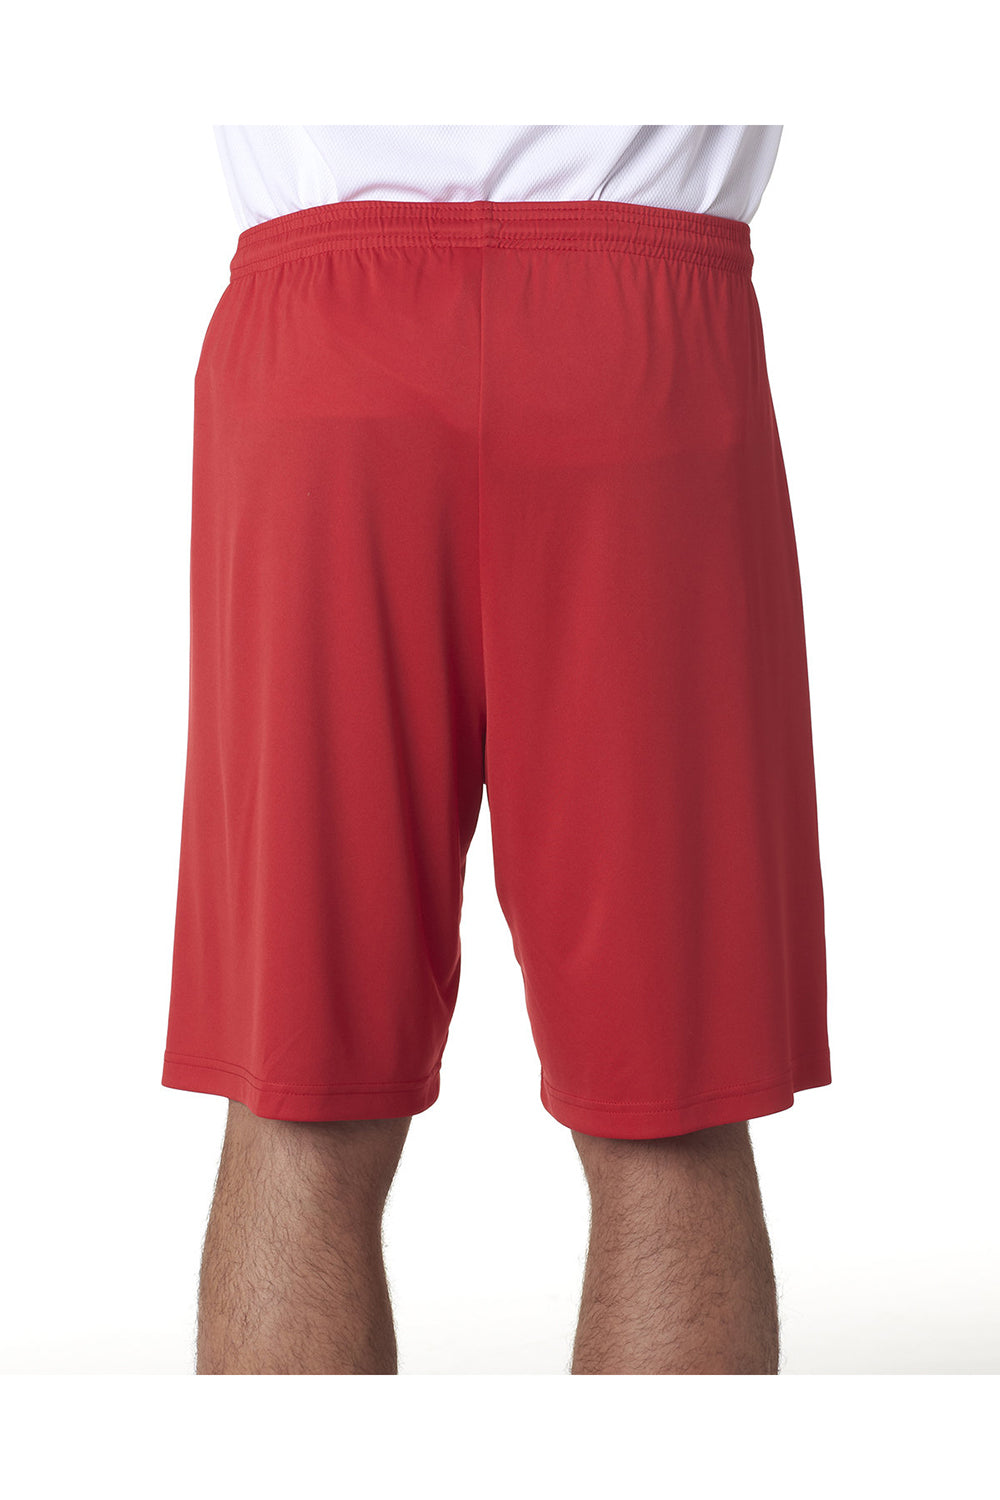 A4 N5283 Mens Moisture Wicking Performance Shorts Scarlet Red Model Back